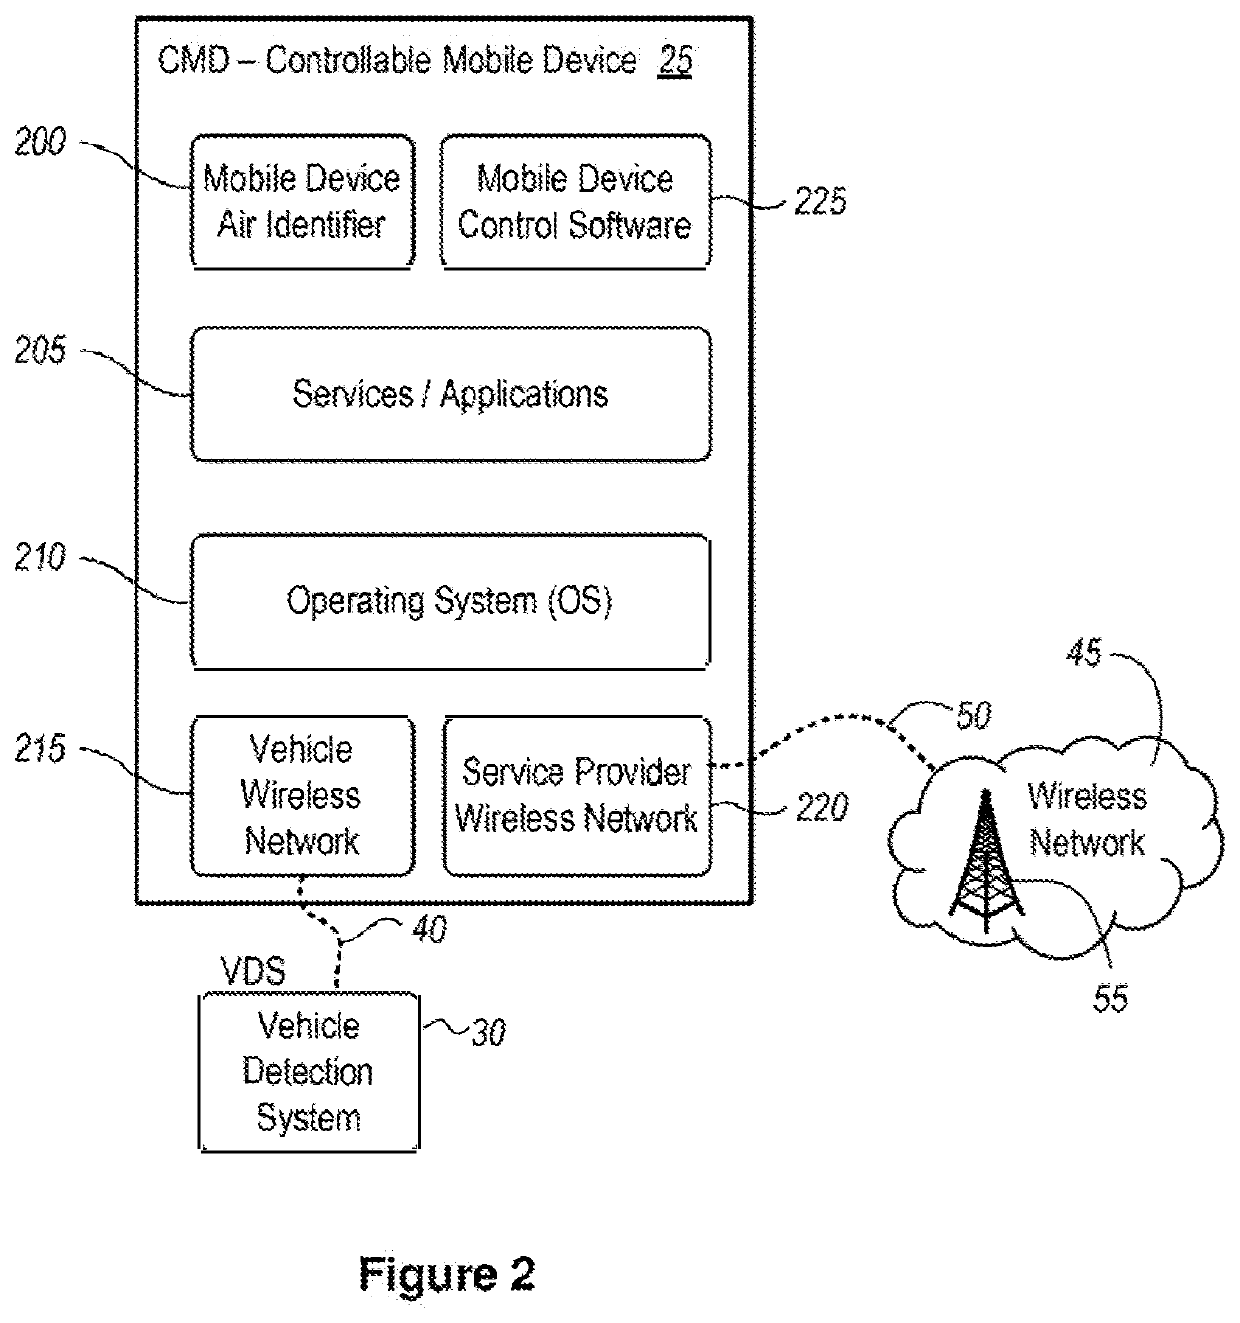 Method and system for detecting, monitoring, and controlling a mobile communication device